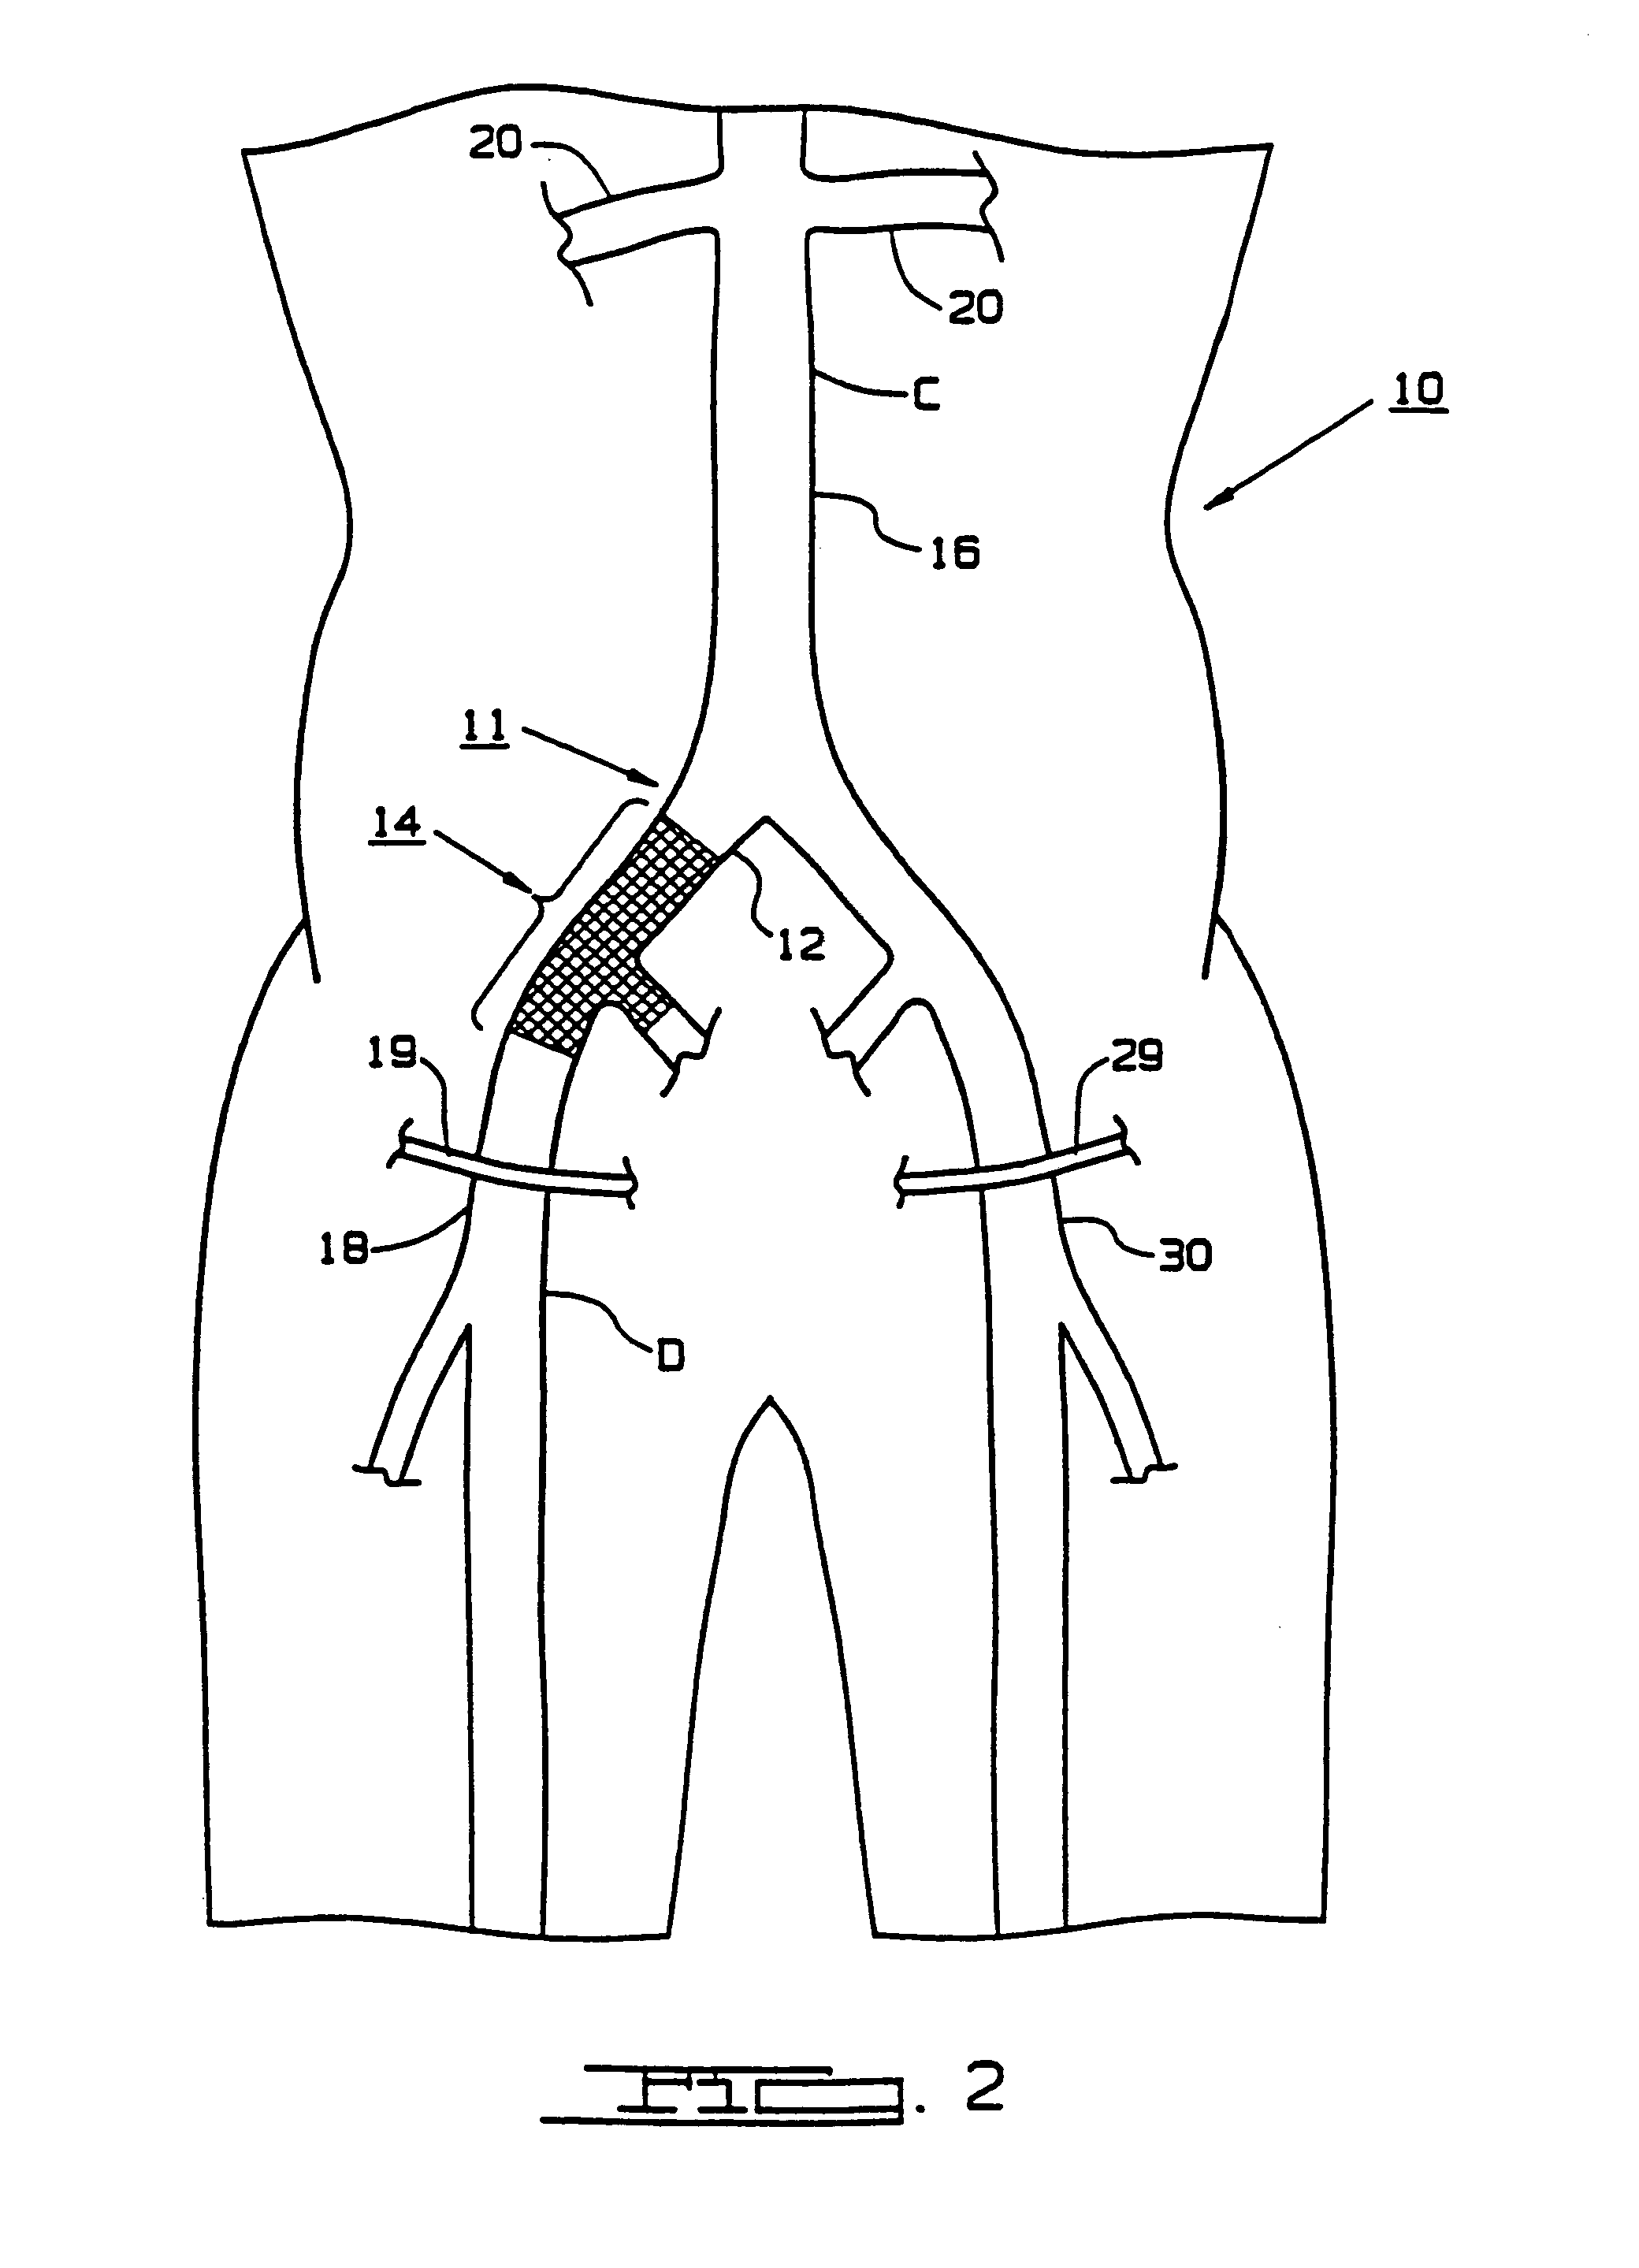 Endoscopic bypass grafting method utilizing an inguinal approach